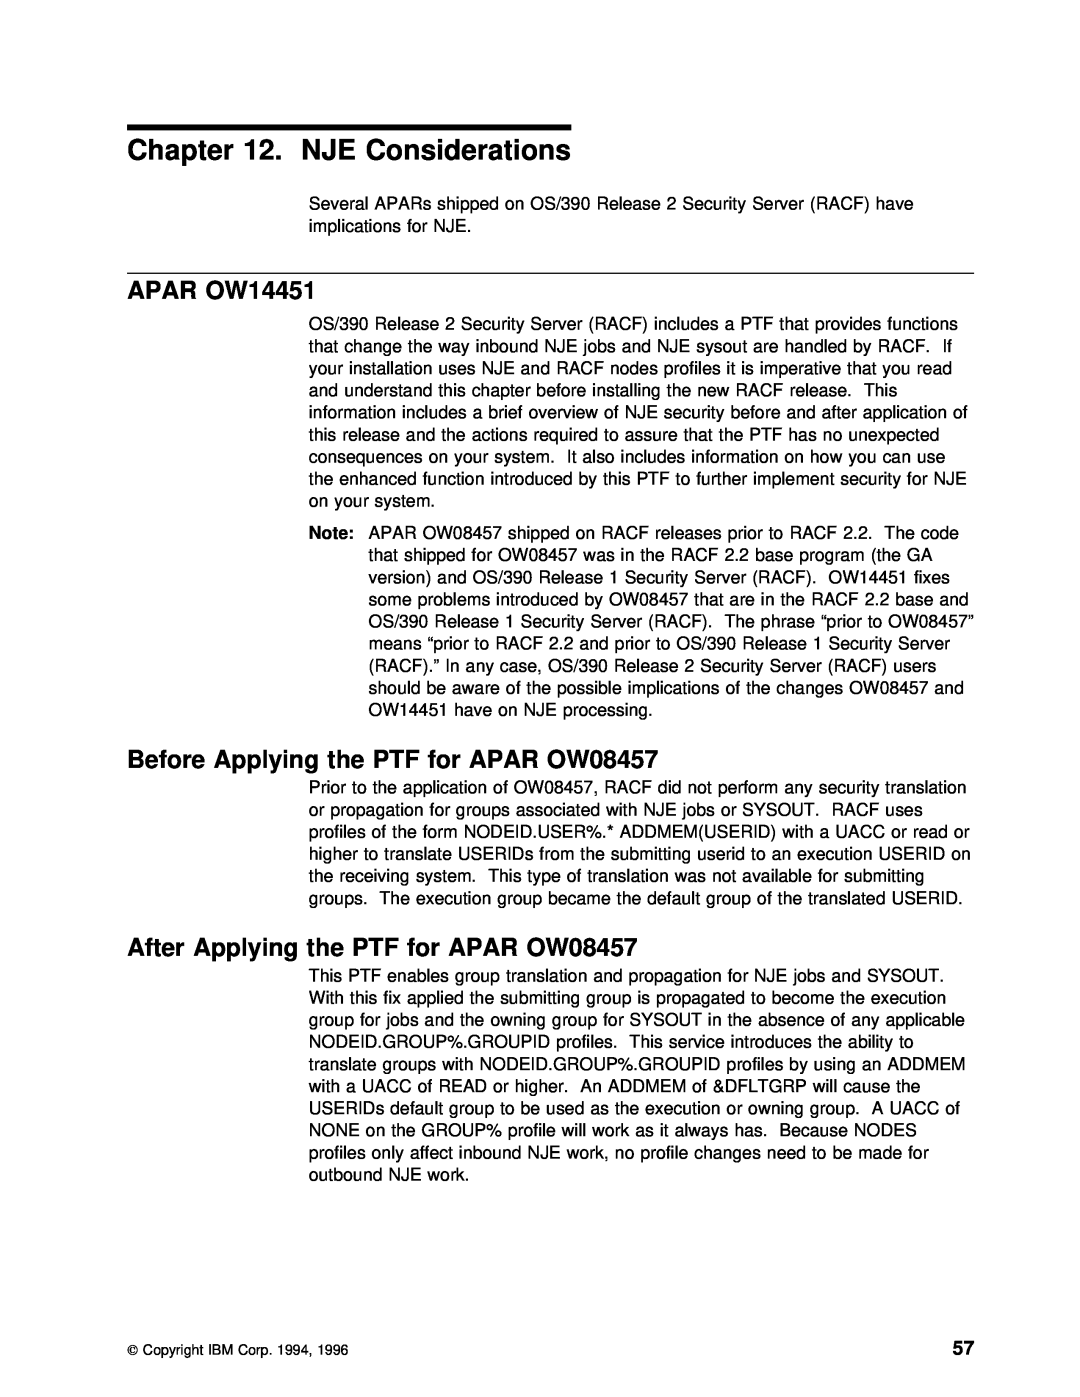 IBM GC28-1920-01 manual NJE Considerations, APAR OW14451, OW08457, After Applying the PTF, Before Applying the PTF 